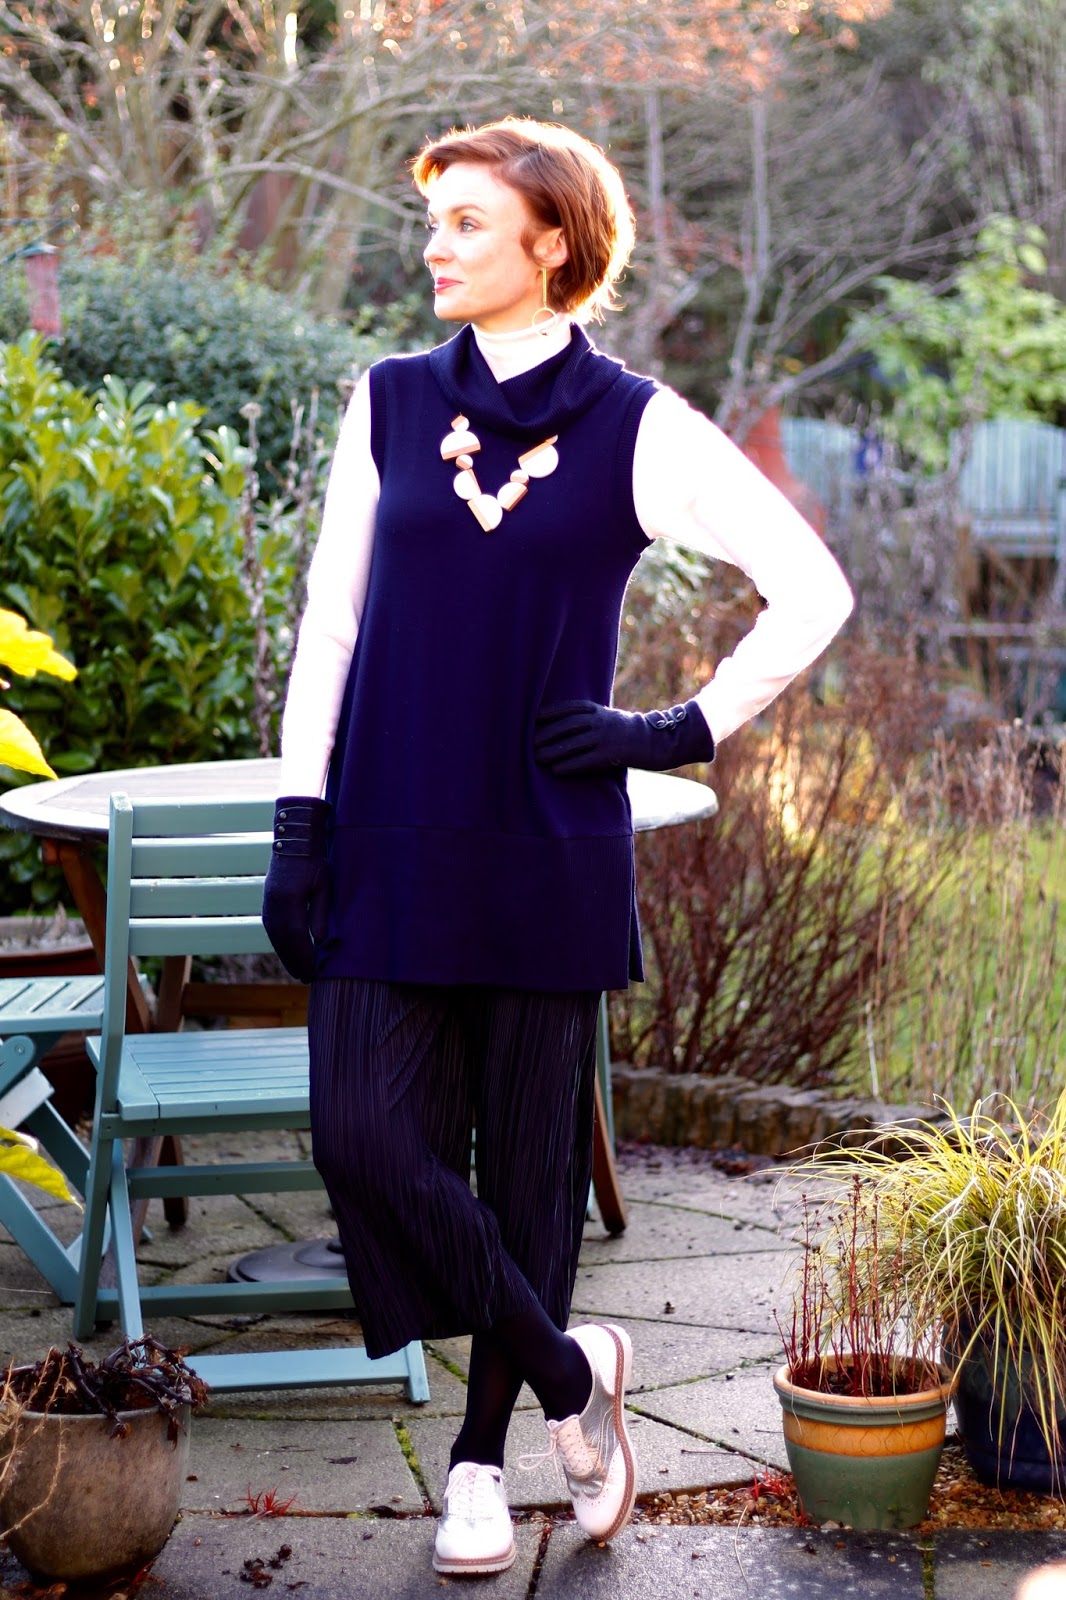 3 ways to Hide those Extra Pounds | Navy Culottes, White poloneck & Brogues